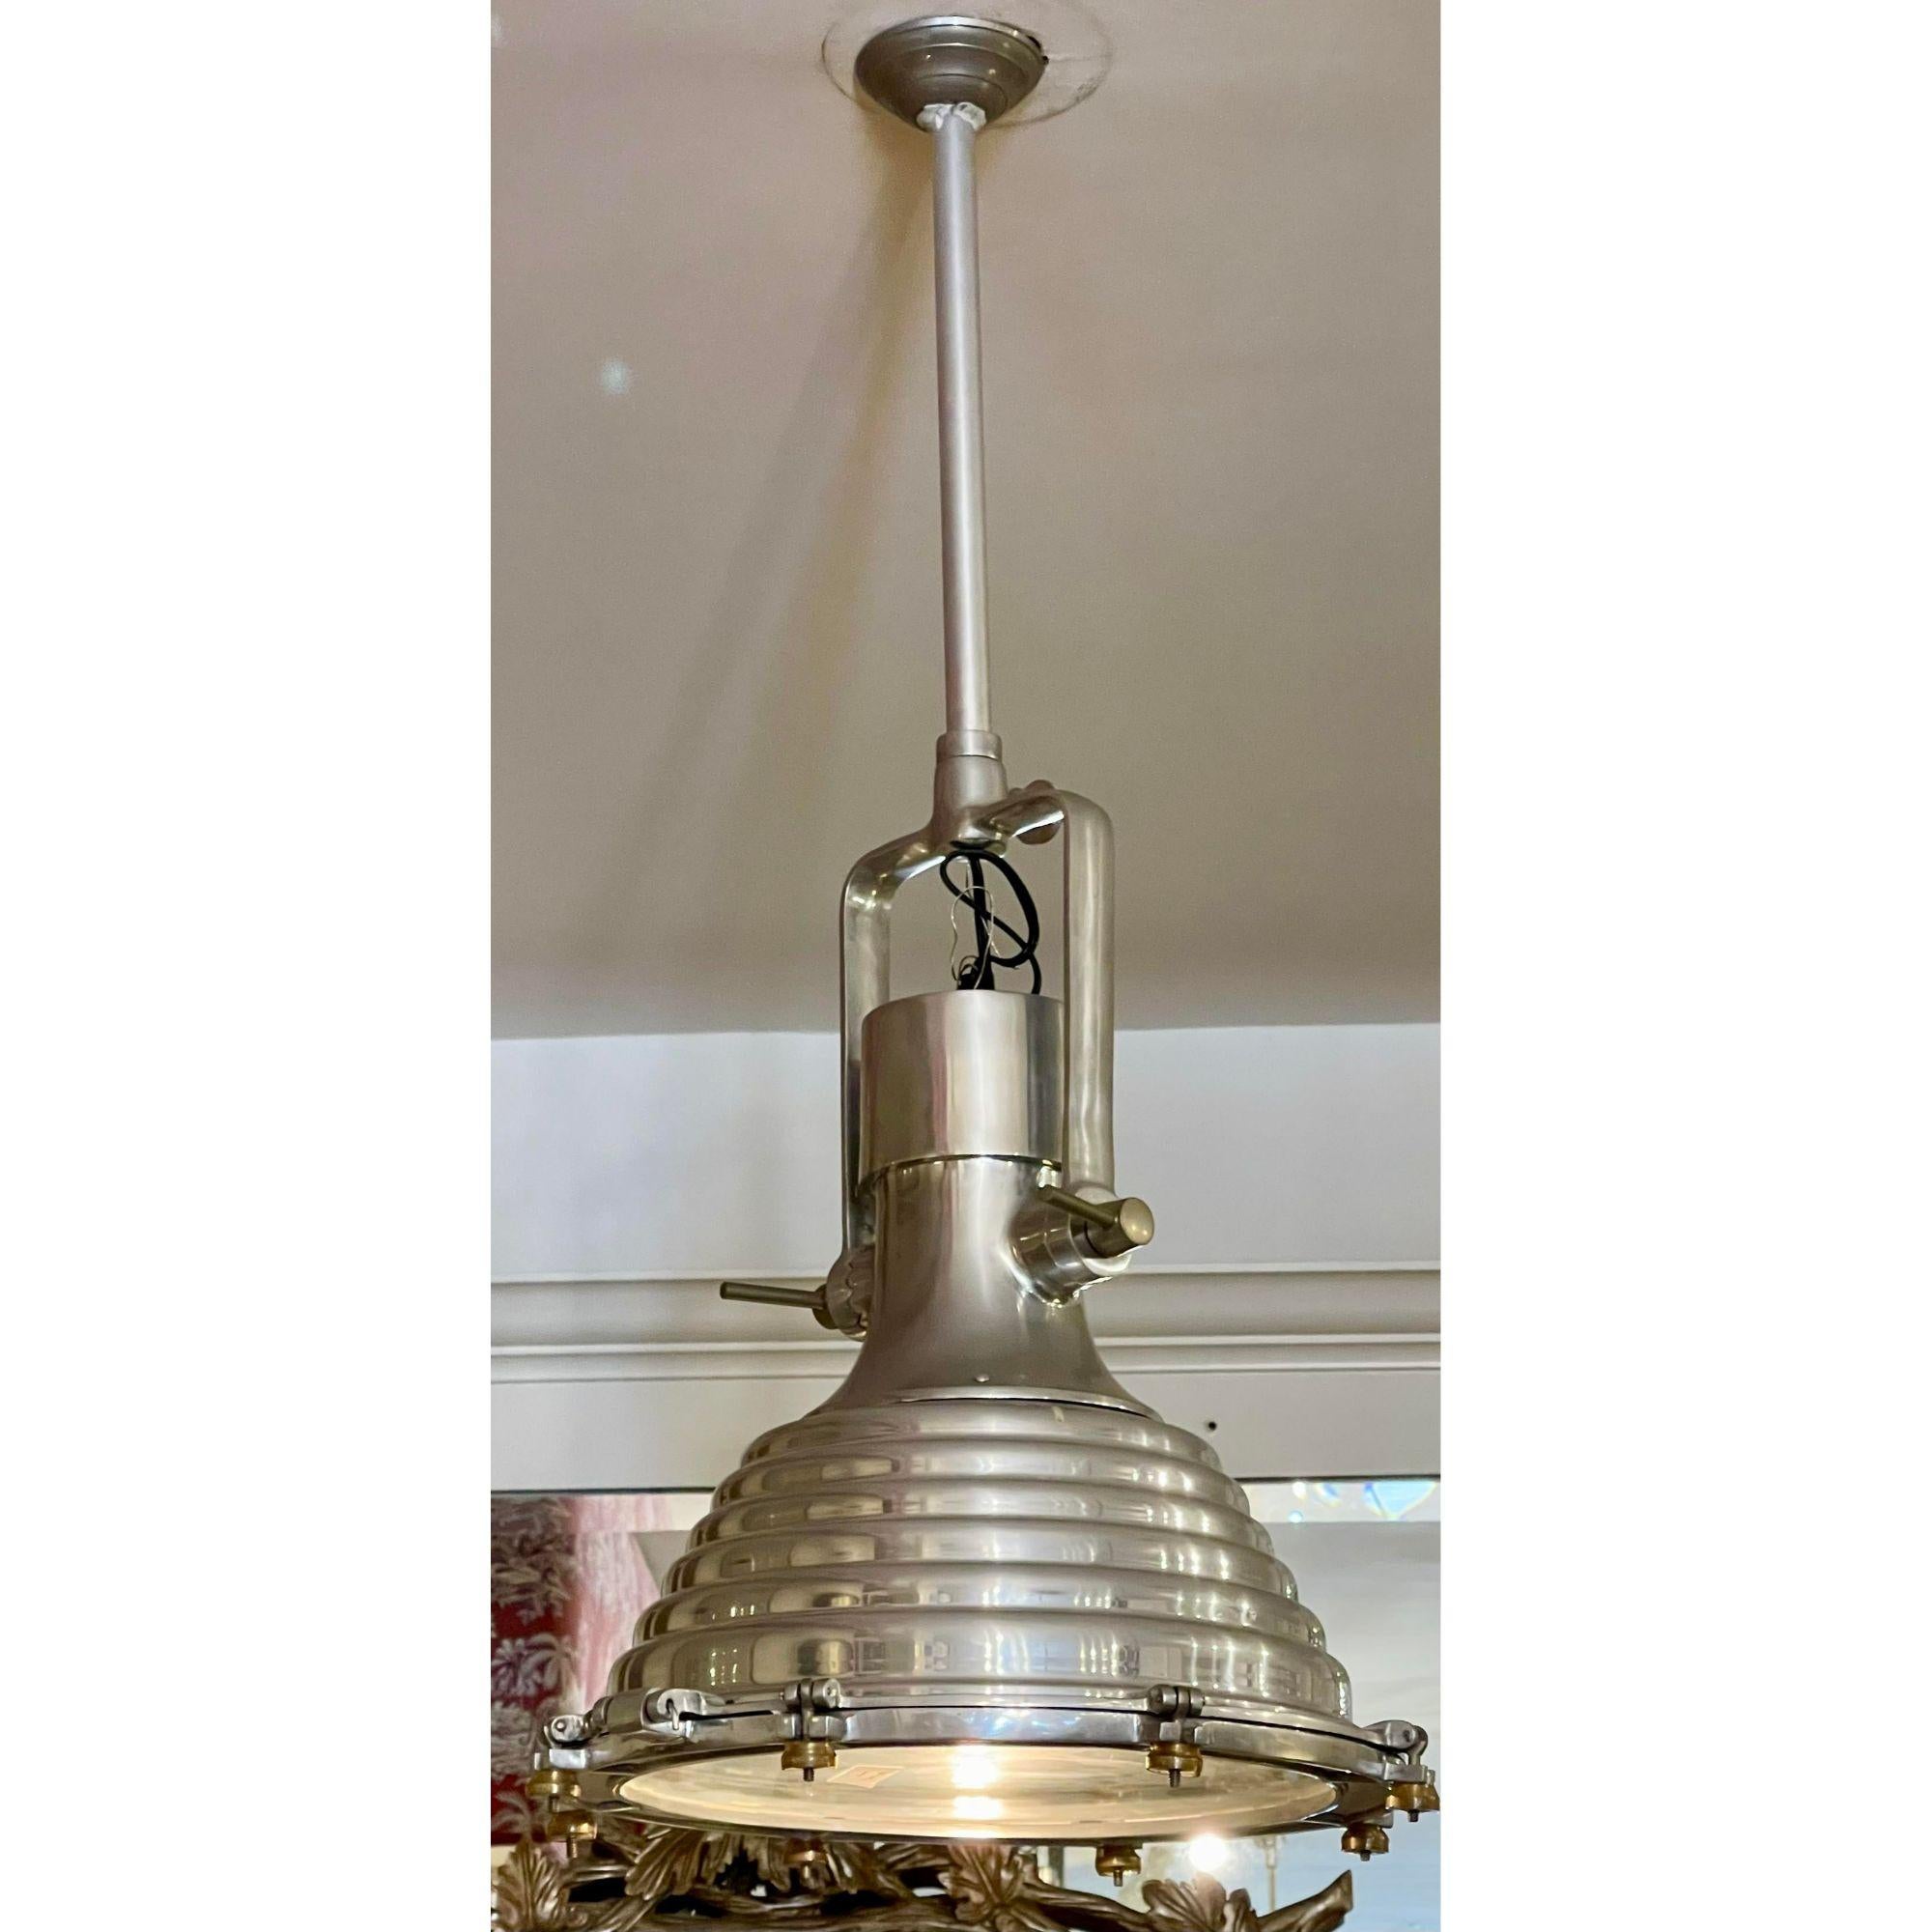 Industrial Chic Nautical Pendant Light Fixture.. this listing is for one fixture but we actually have six.
Provenance: From the $58M home of Sylvester Stallone who sold the house to Adele

Additional information: 
Materials: Chrome, Glass,